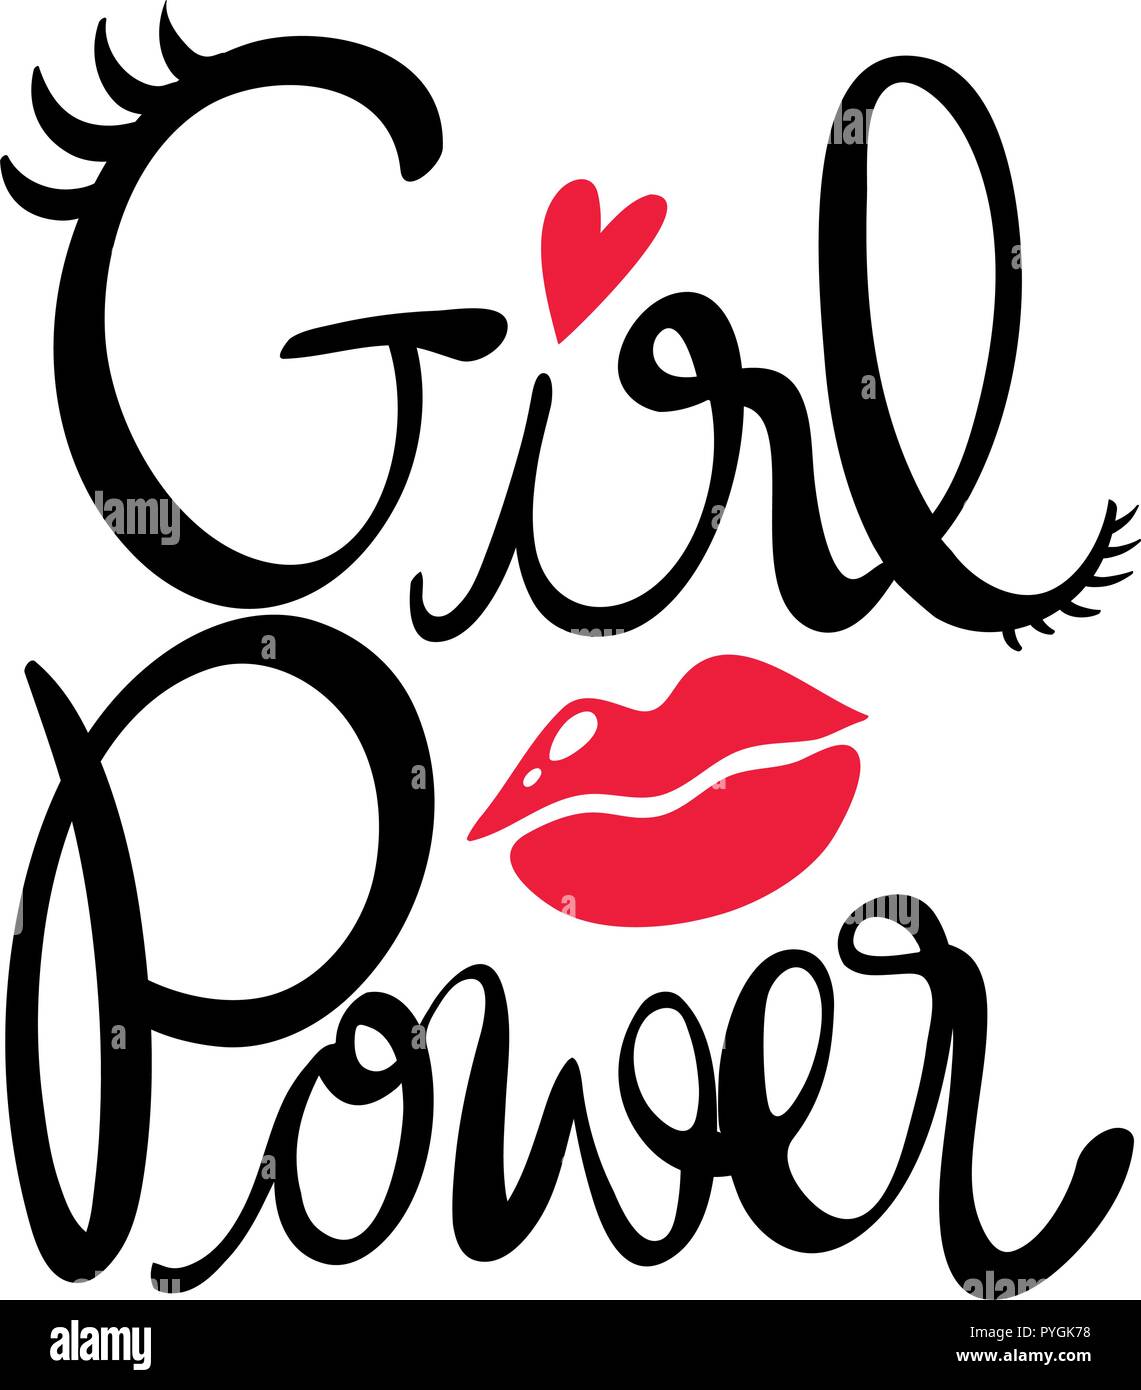 Word expression for girl power illustration Stock Vector